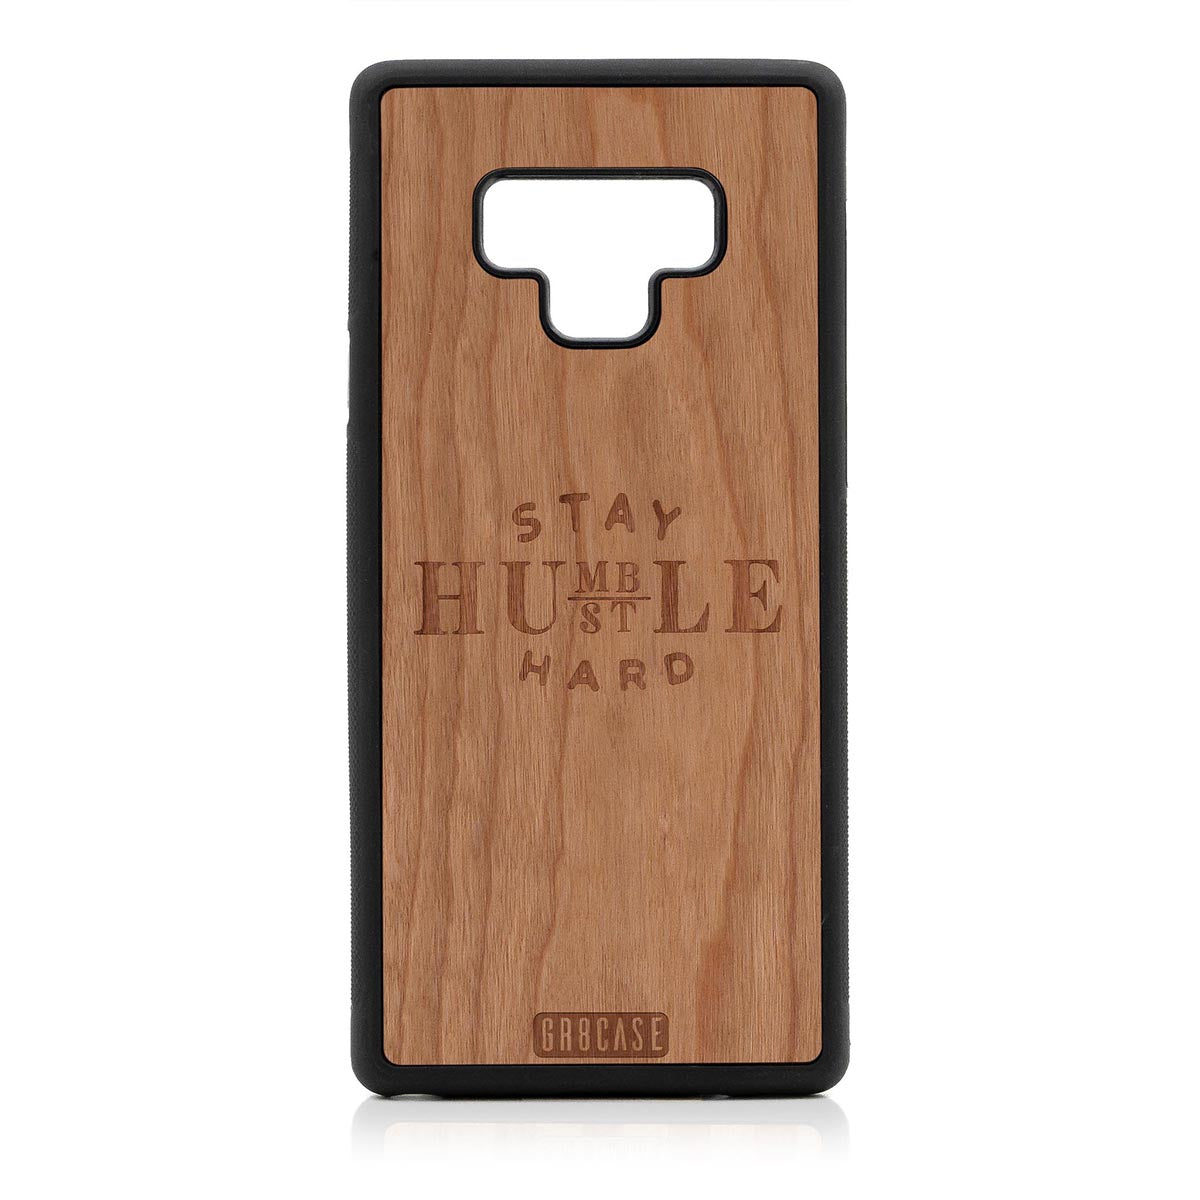 Stay Humble Hustle Hard Design Wood Case Samsung Galaxy Note 9 by GR8CASE